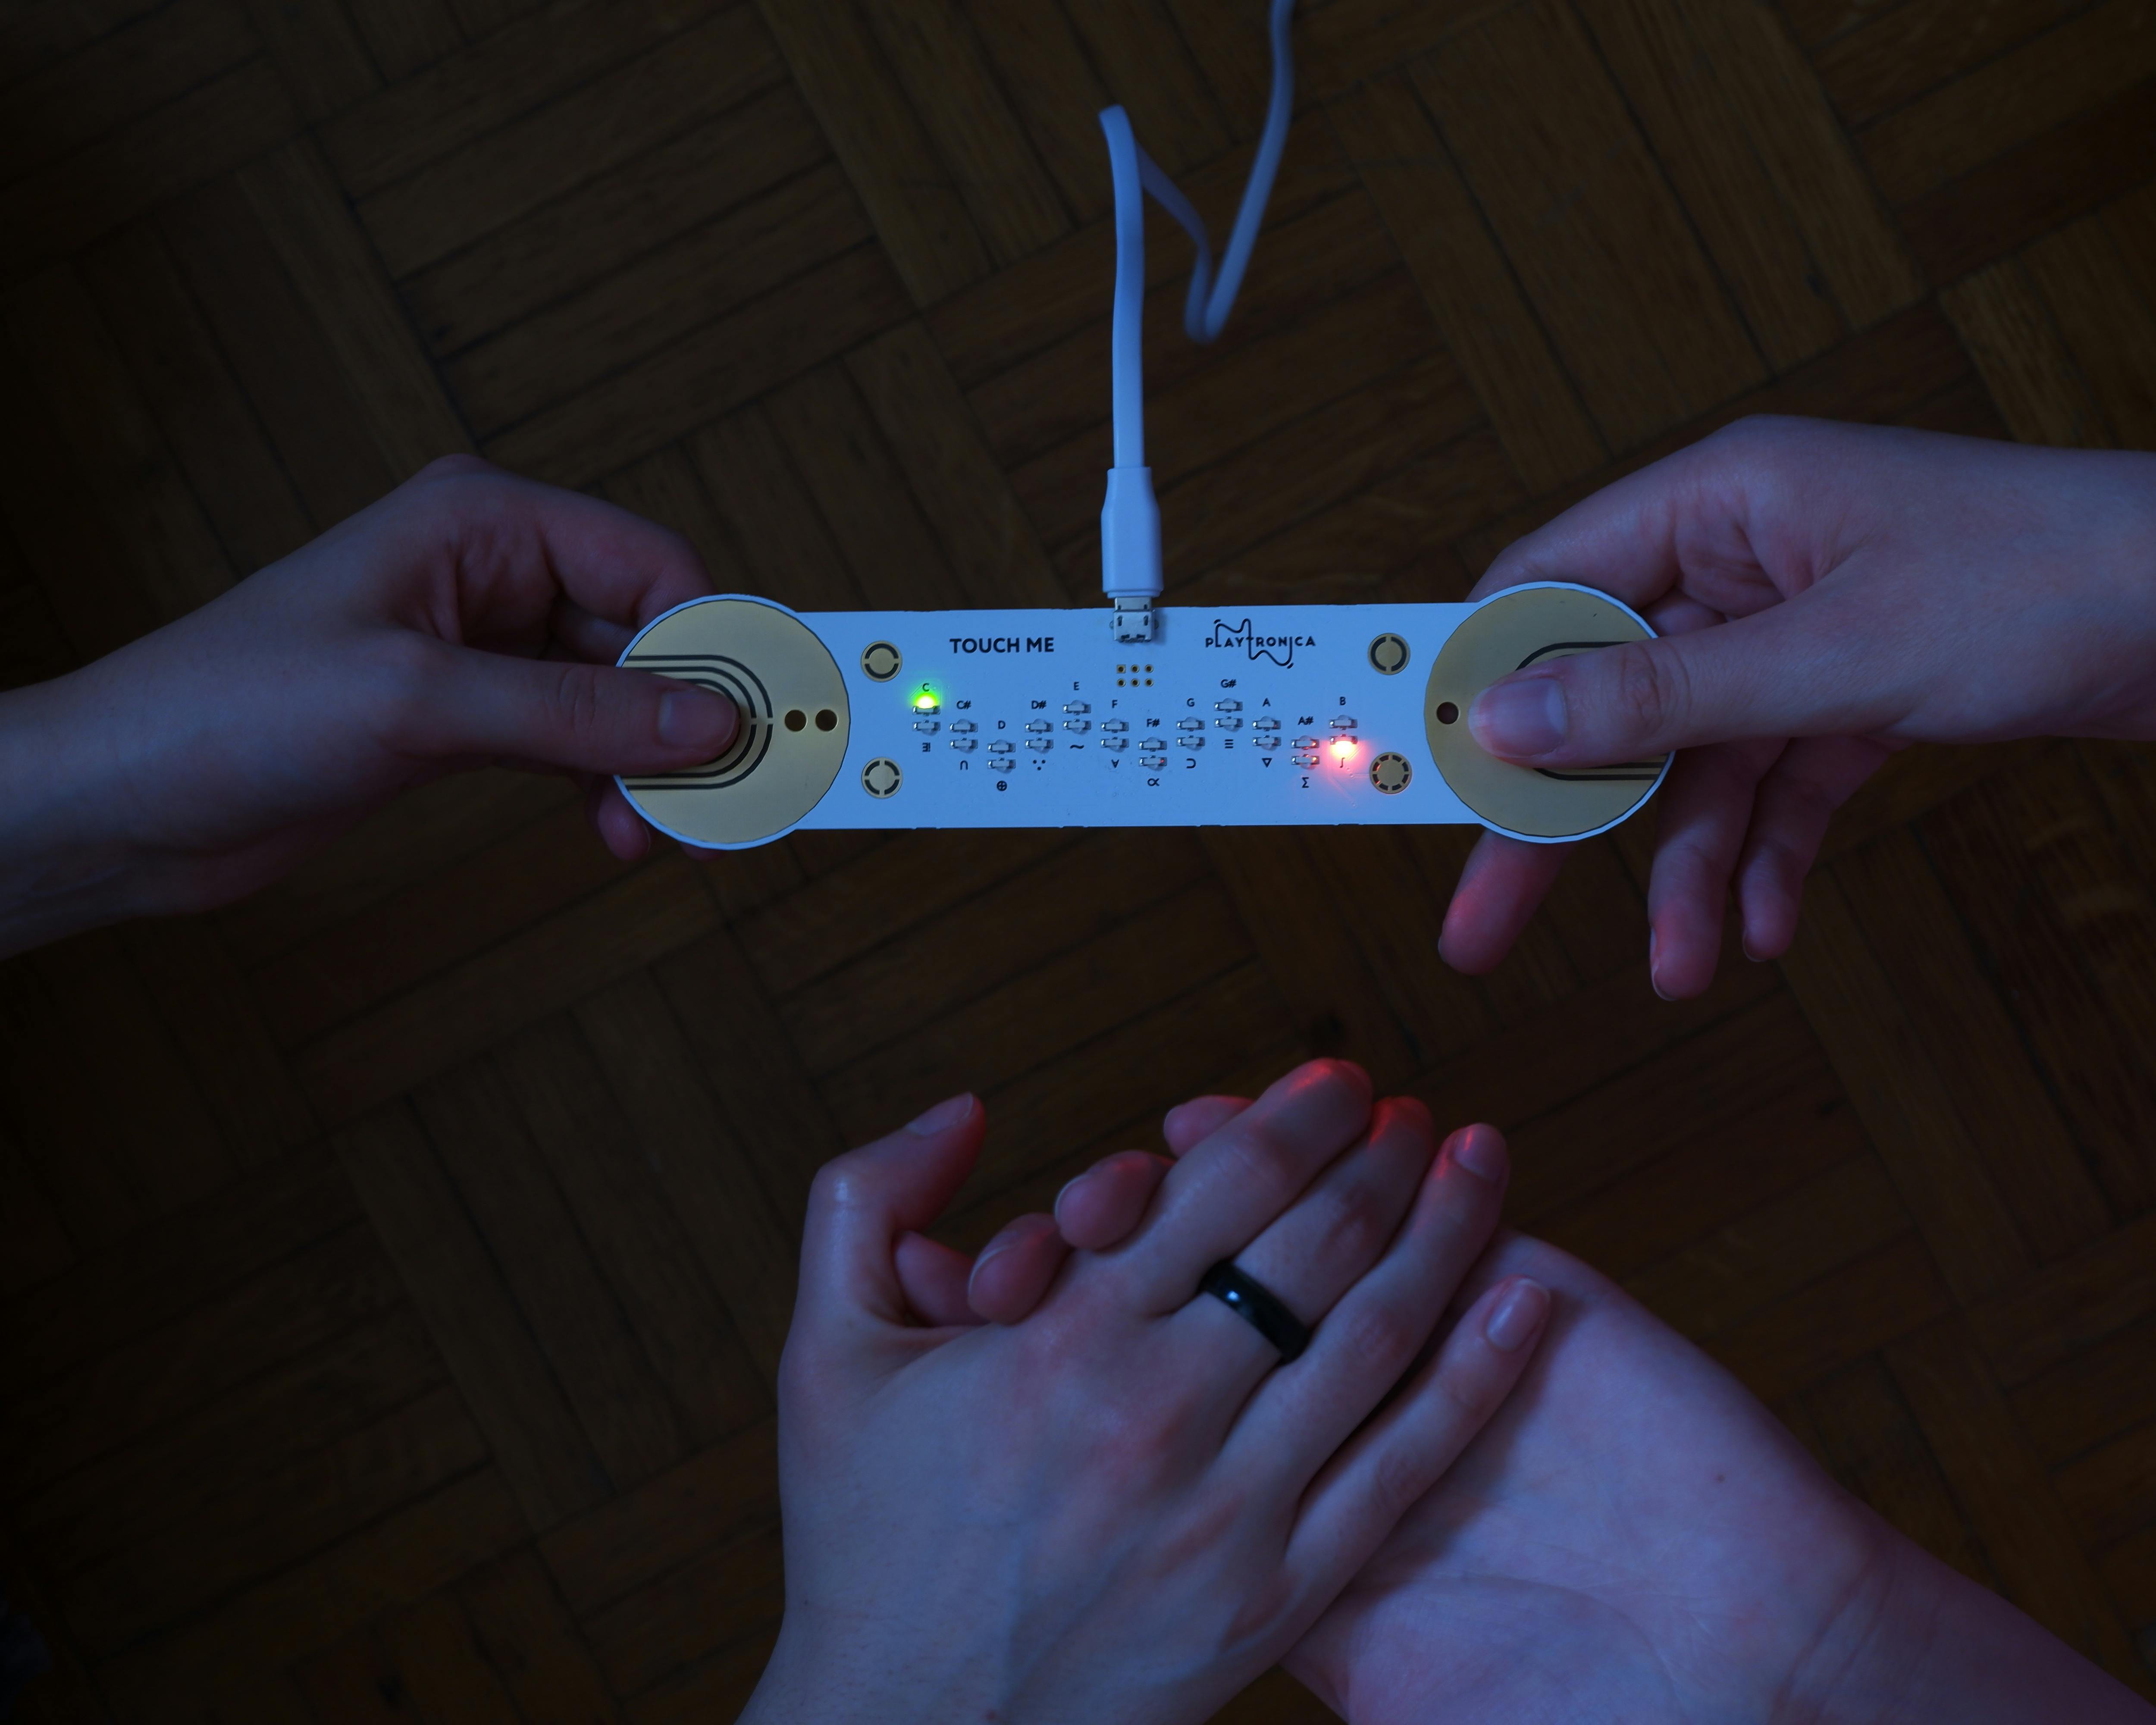 Picture of the TouchMe technology device being used by two people holding hands